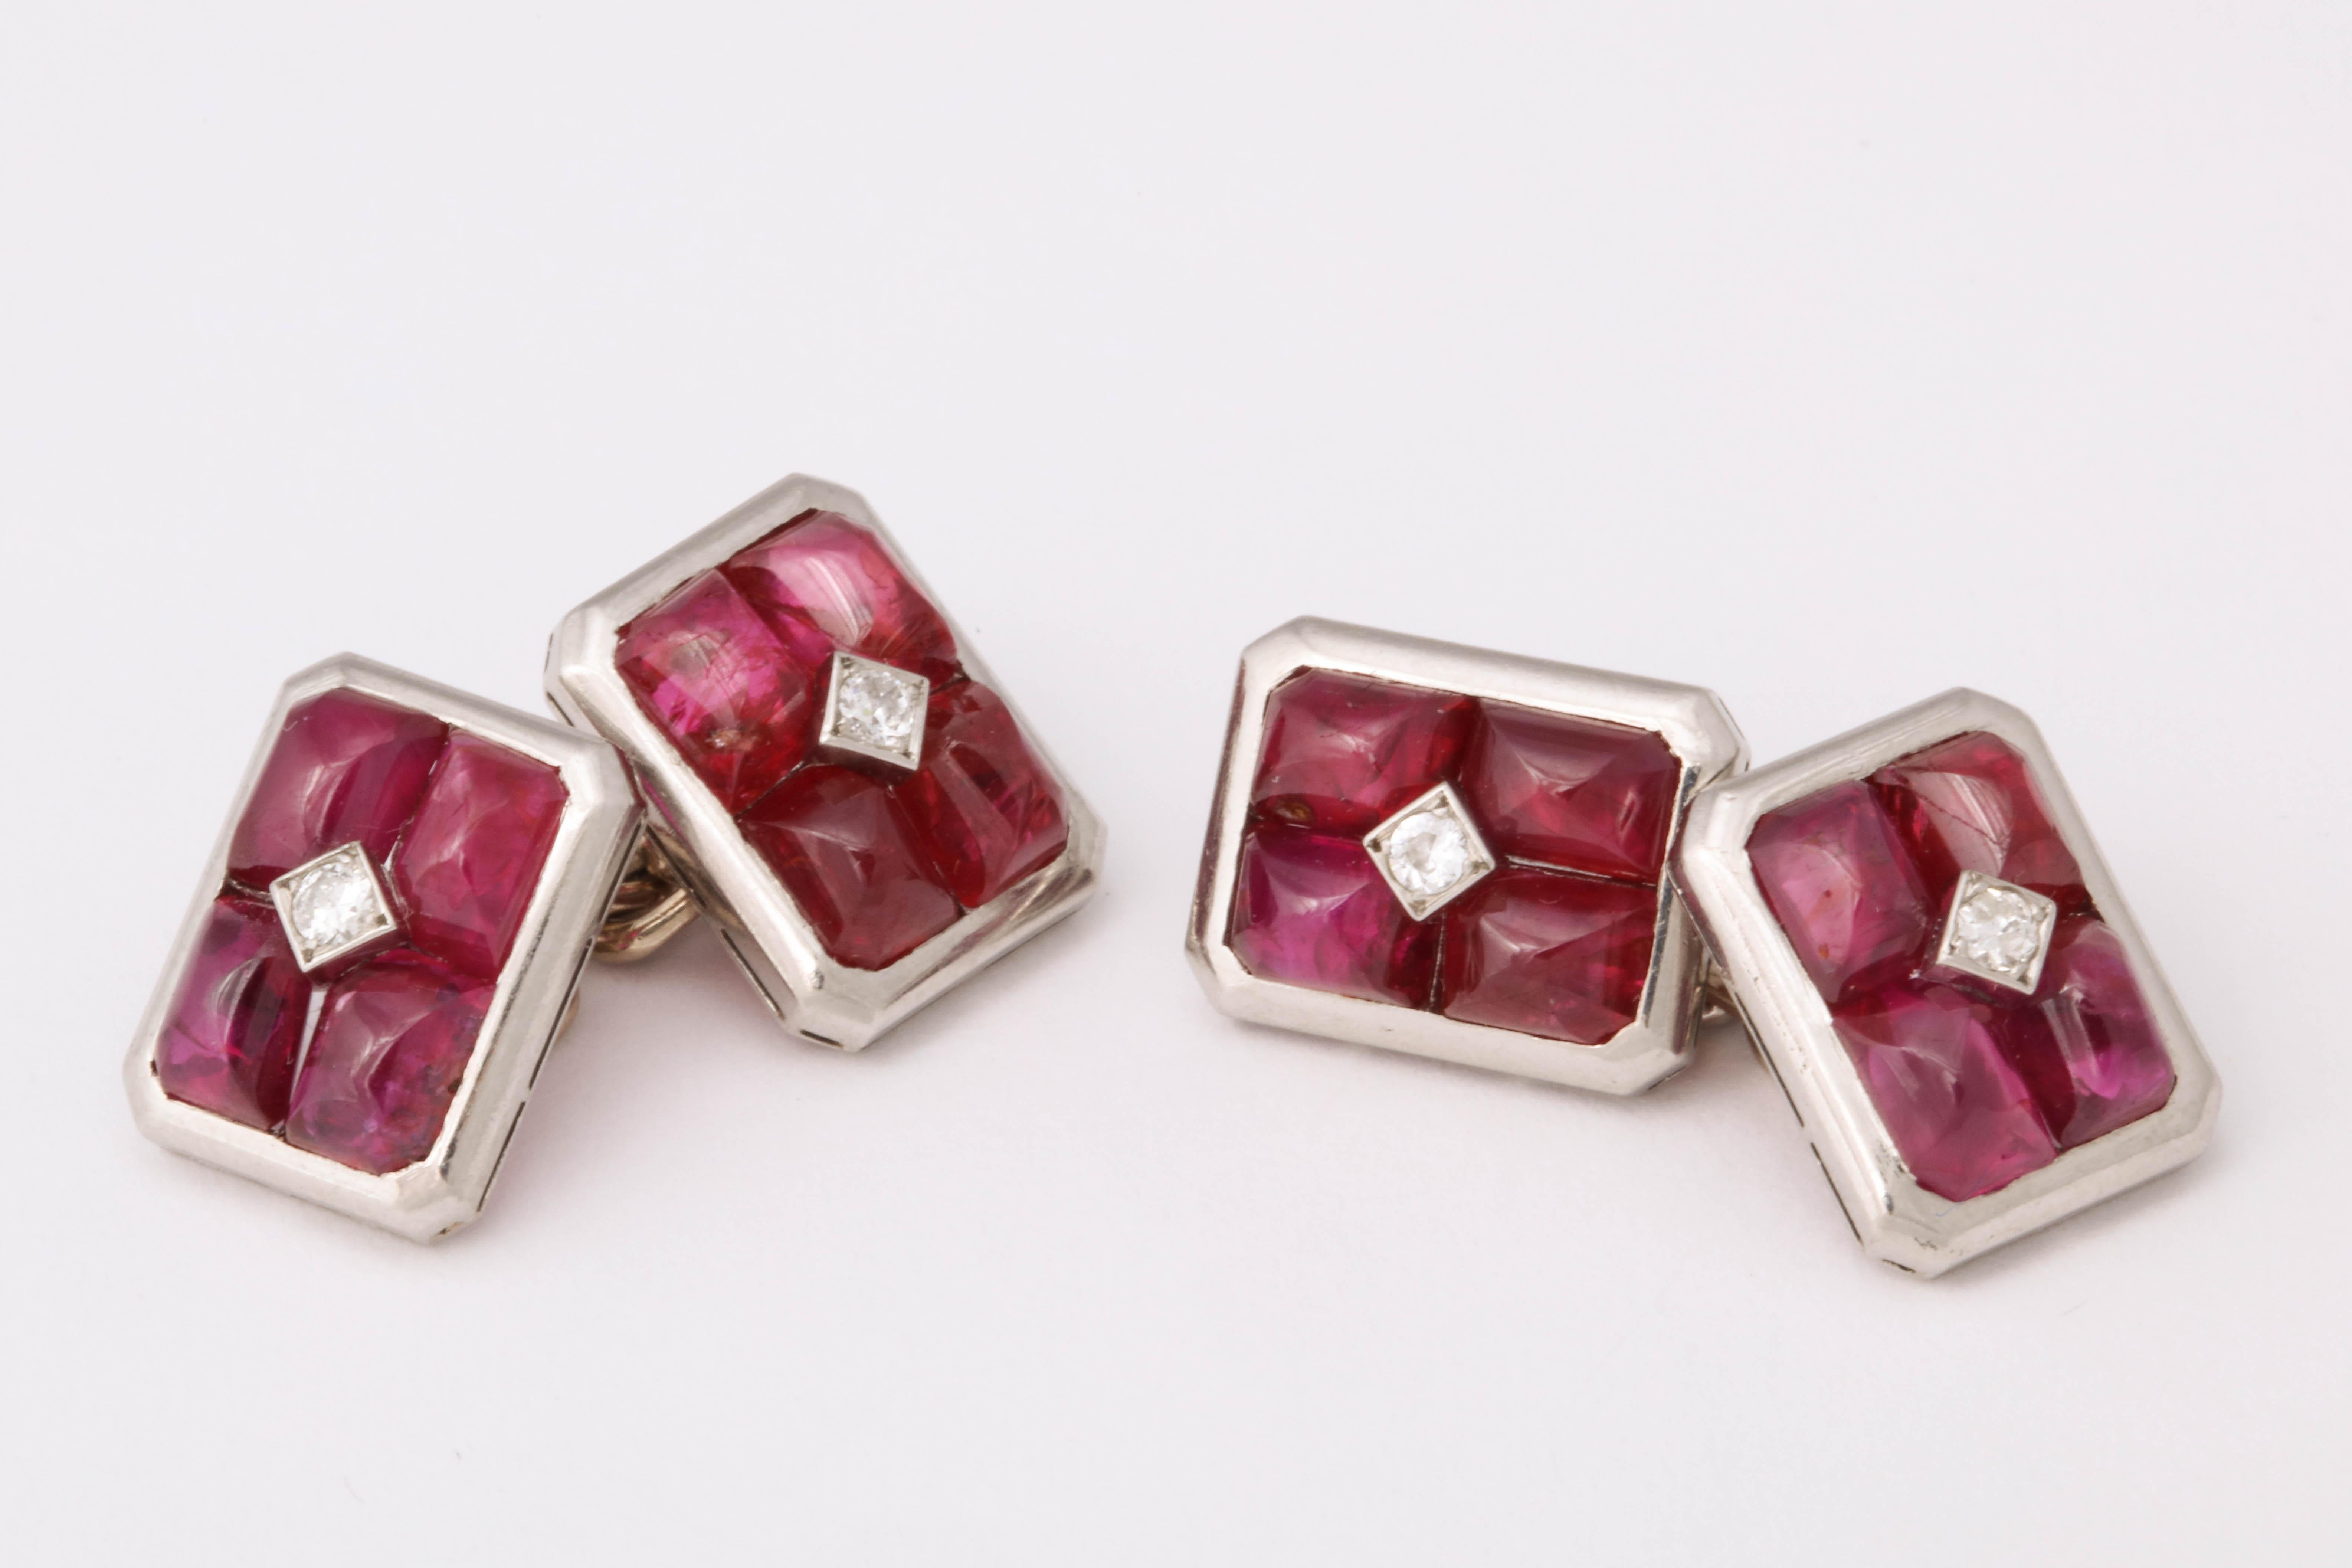 Four cabochon rubies surround a central diamond. Set in platinum. Made in France c. 1935. 